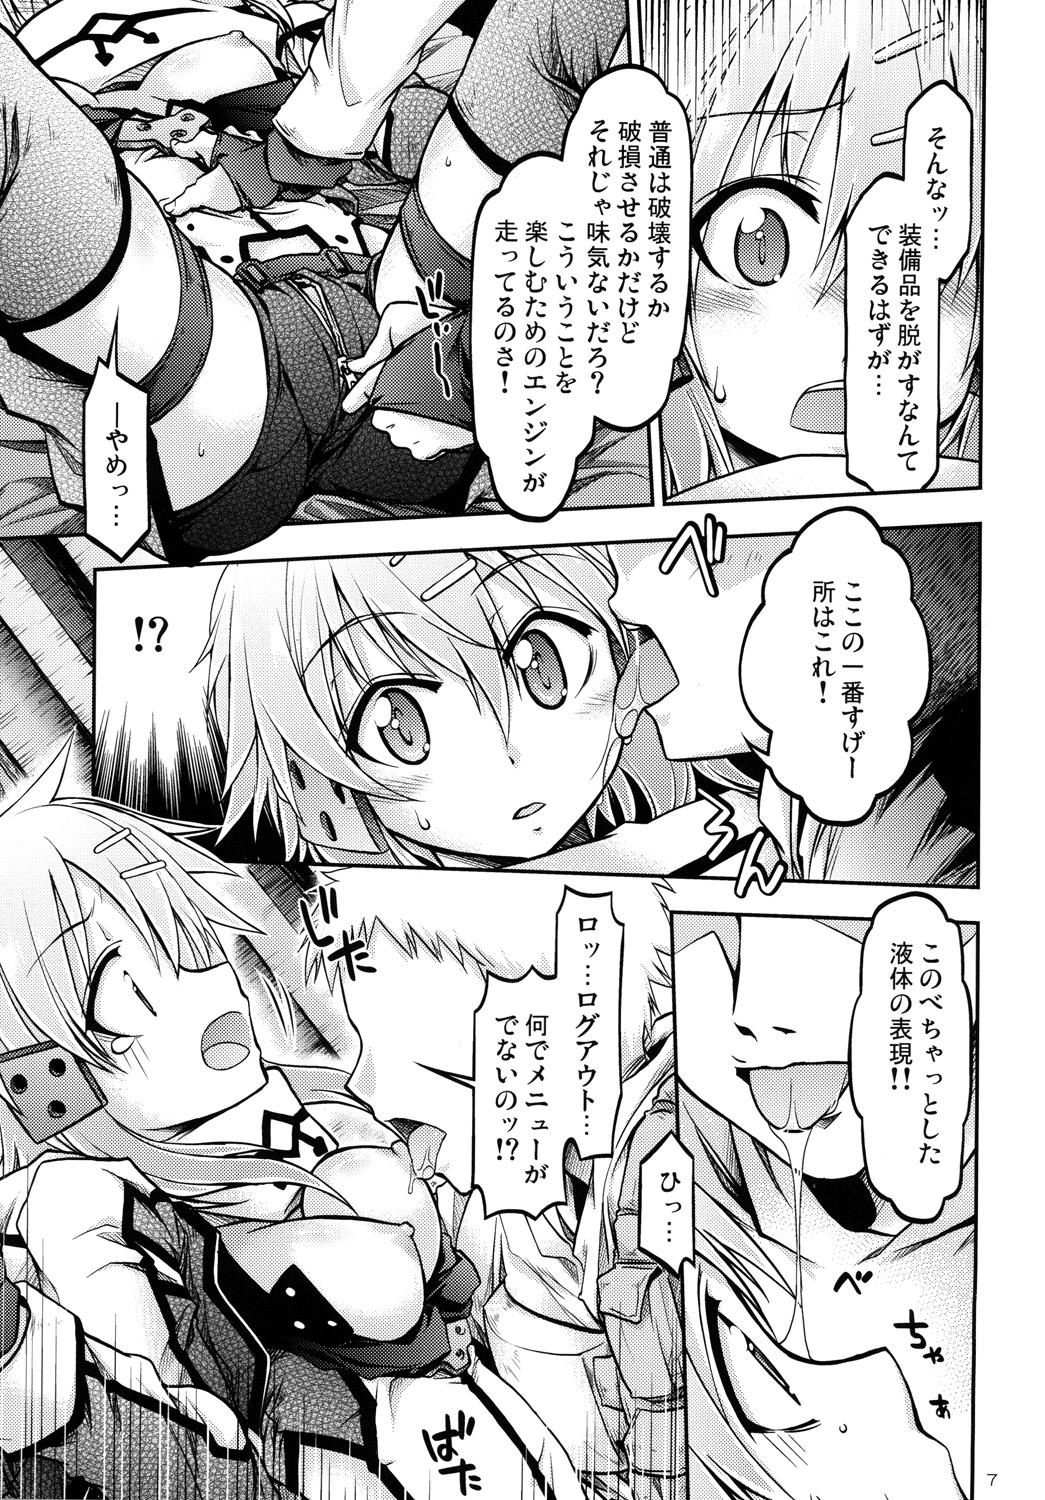 Reality Gspot - Sword art online Foot Fetish - Page 6